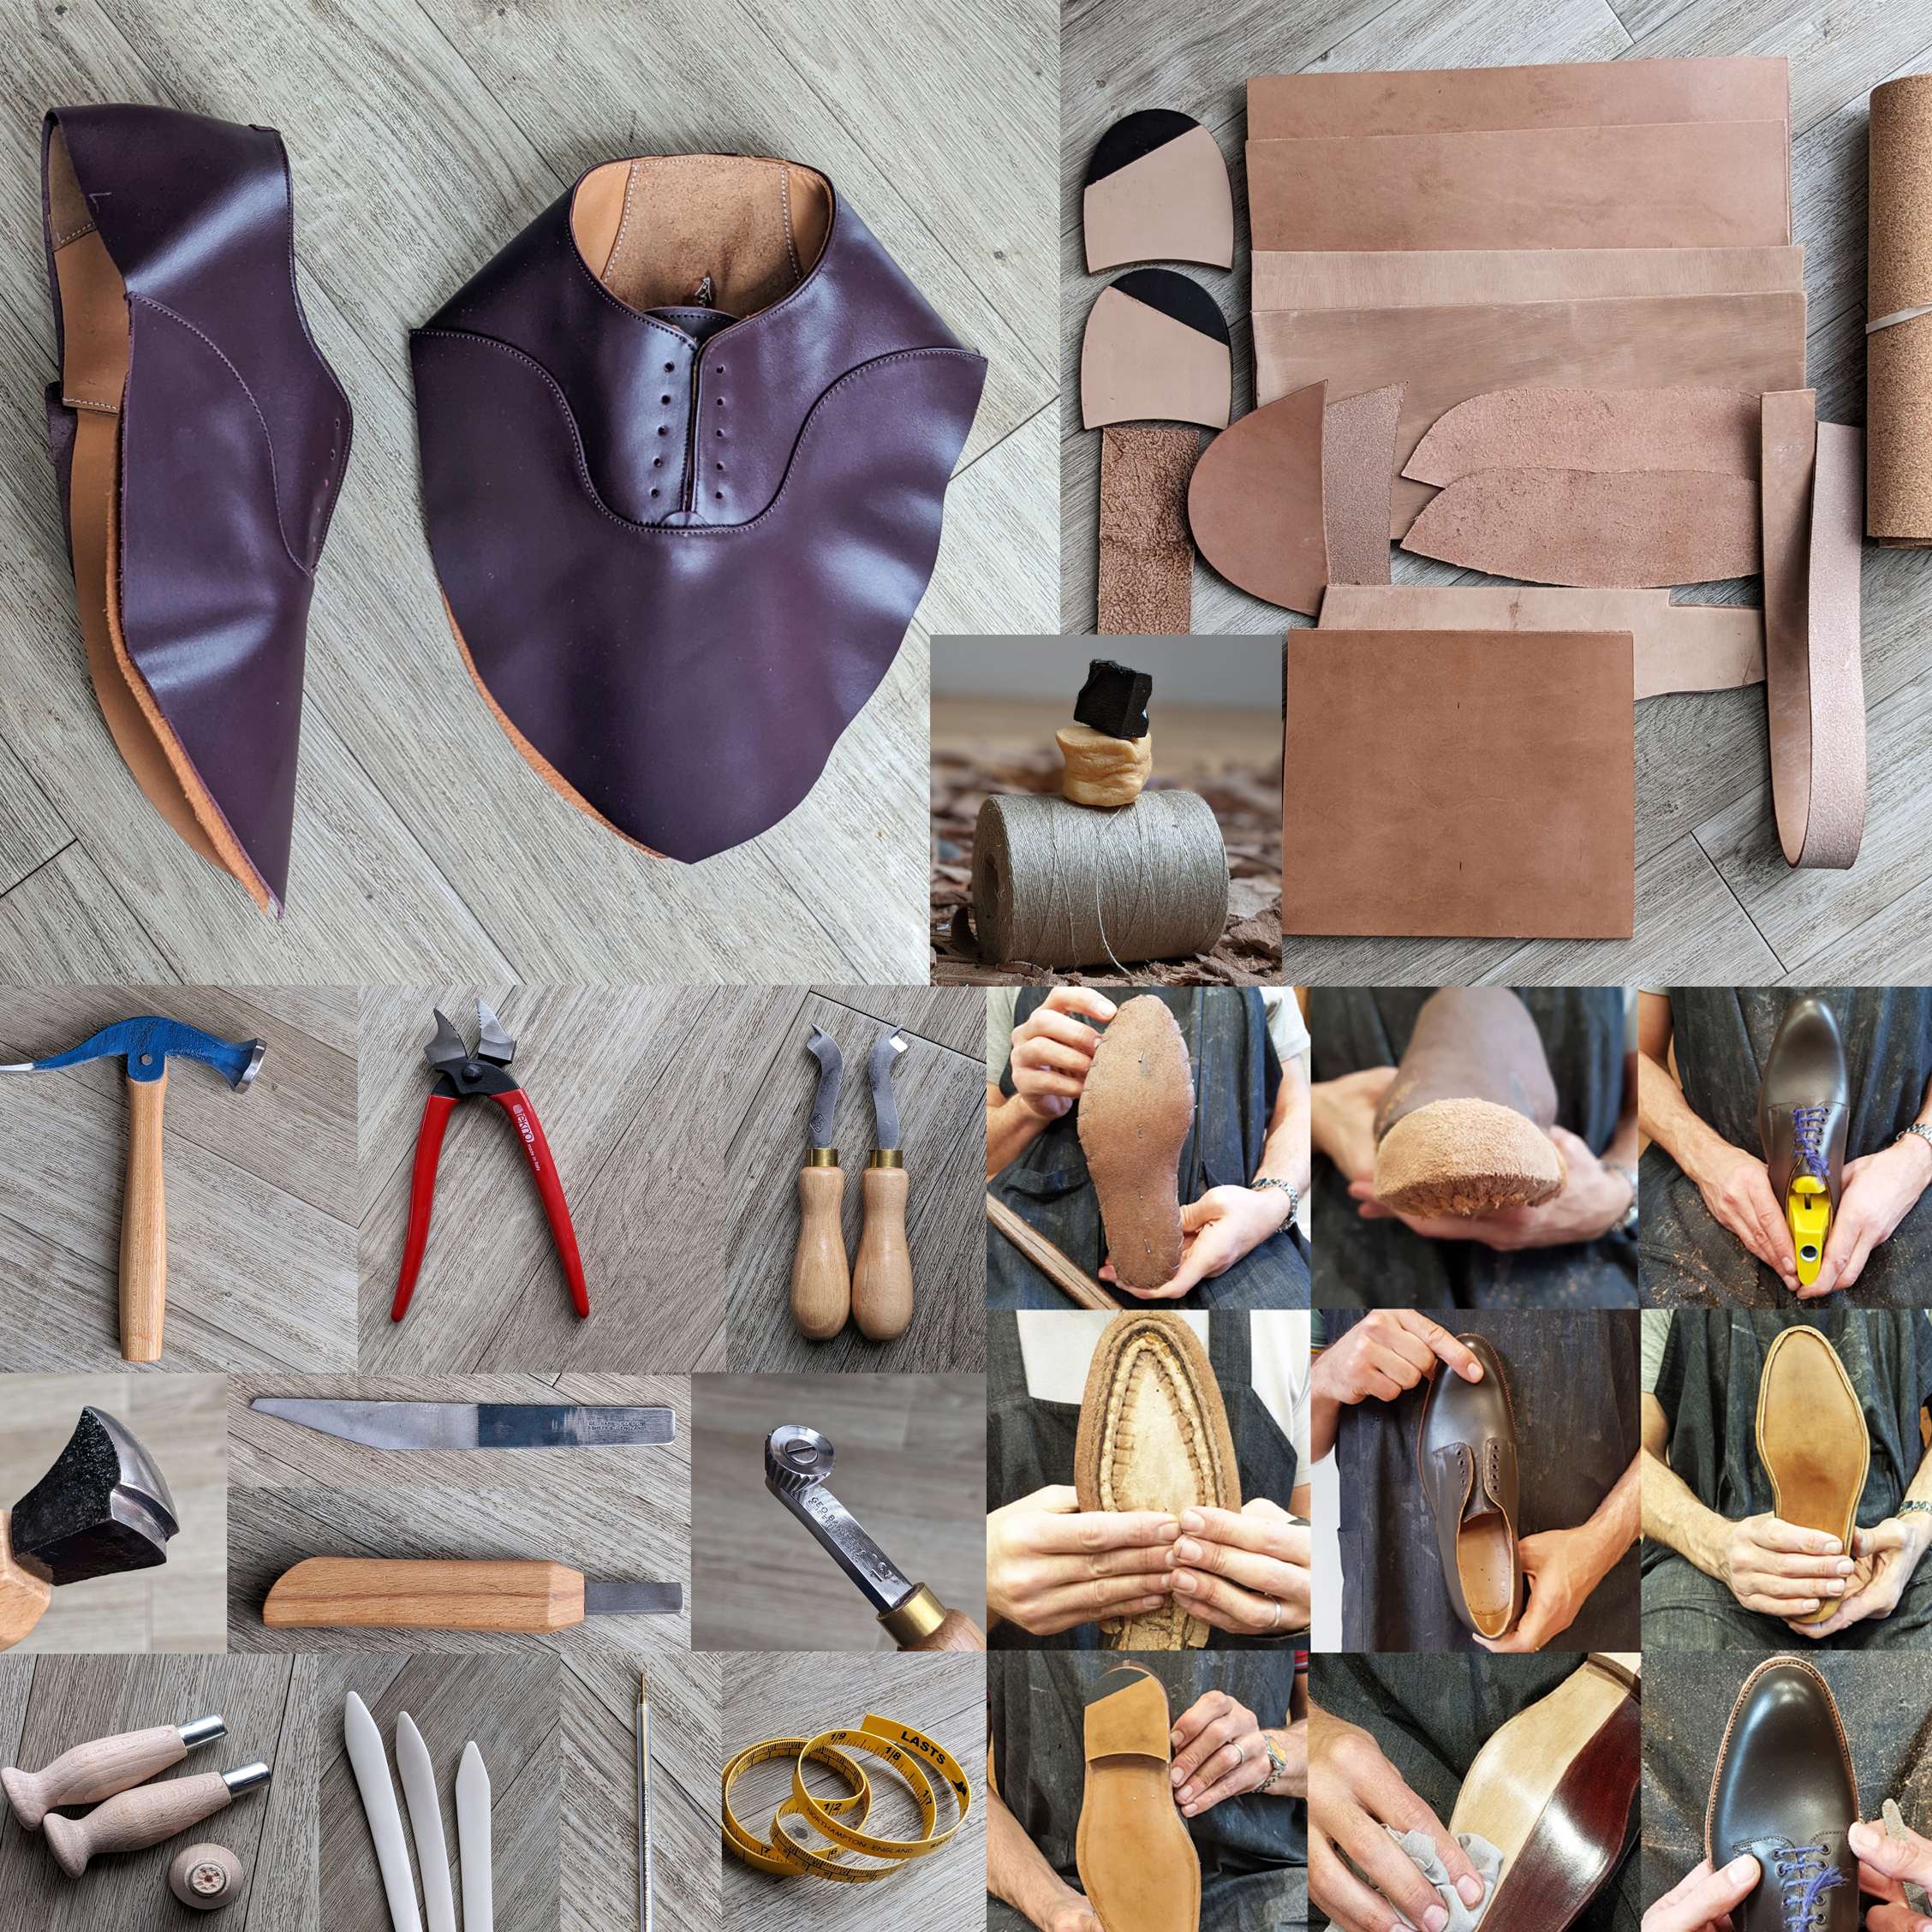 Shoe Making Kit, For making shoes on your lasts